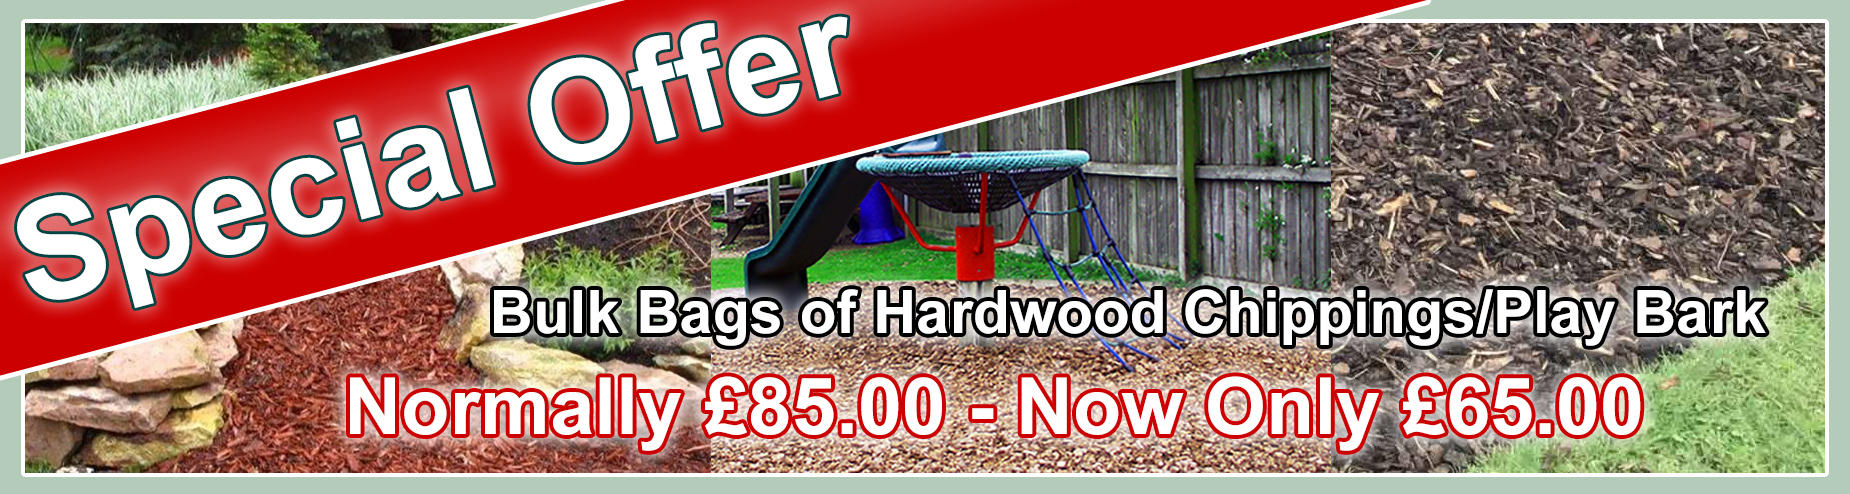 Special Offer on bulk bags of hardwood chippings